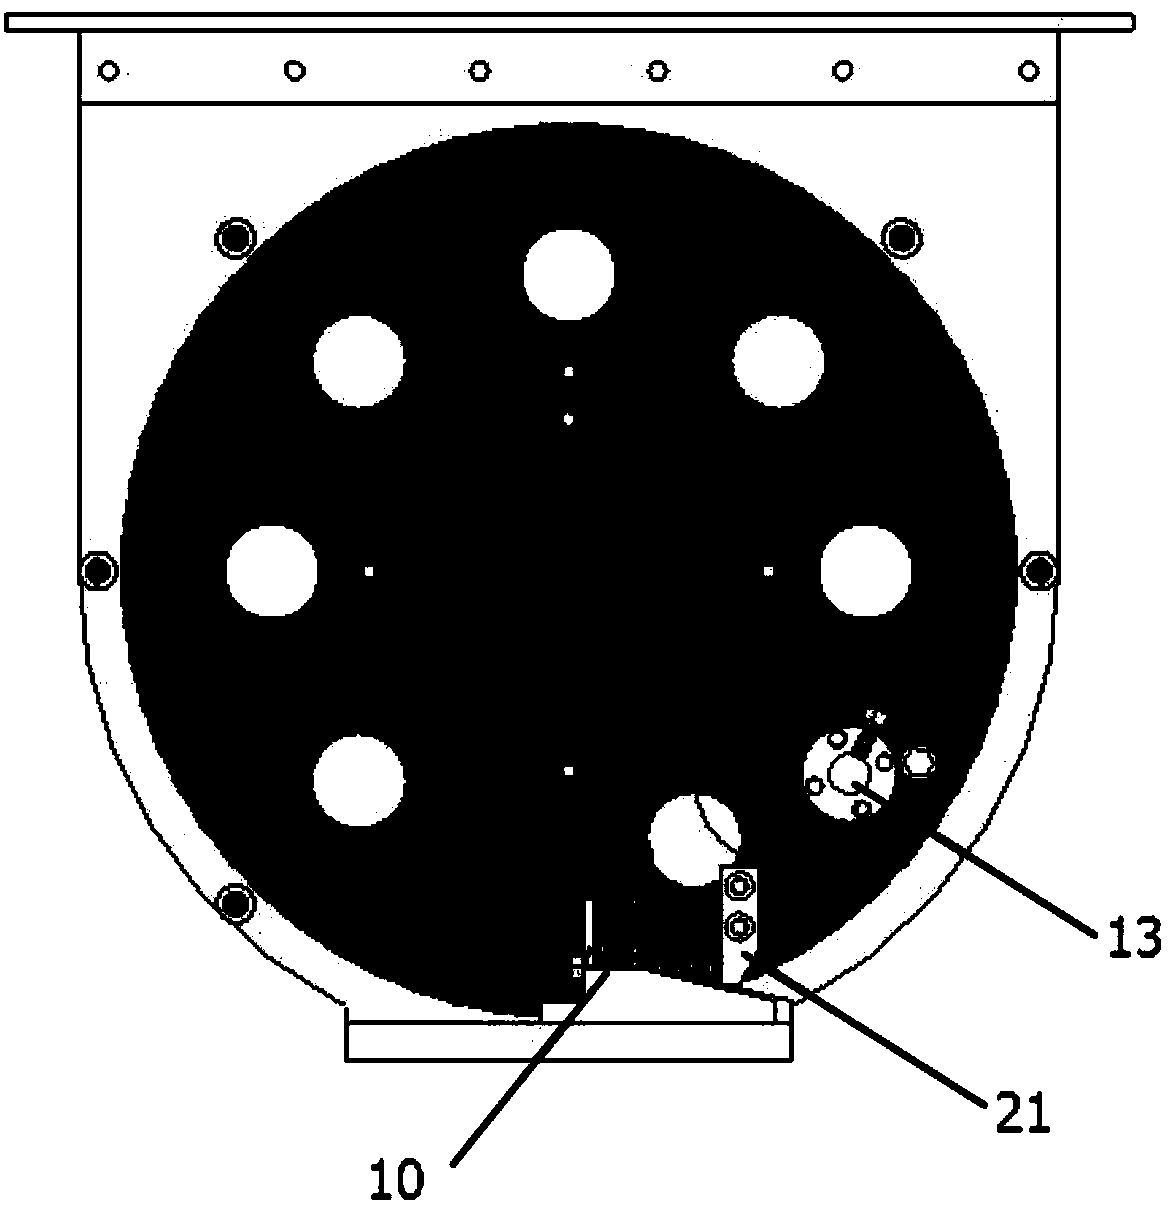 A manual operating device for emergency lowering of the landing gear of a flight simulator